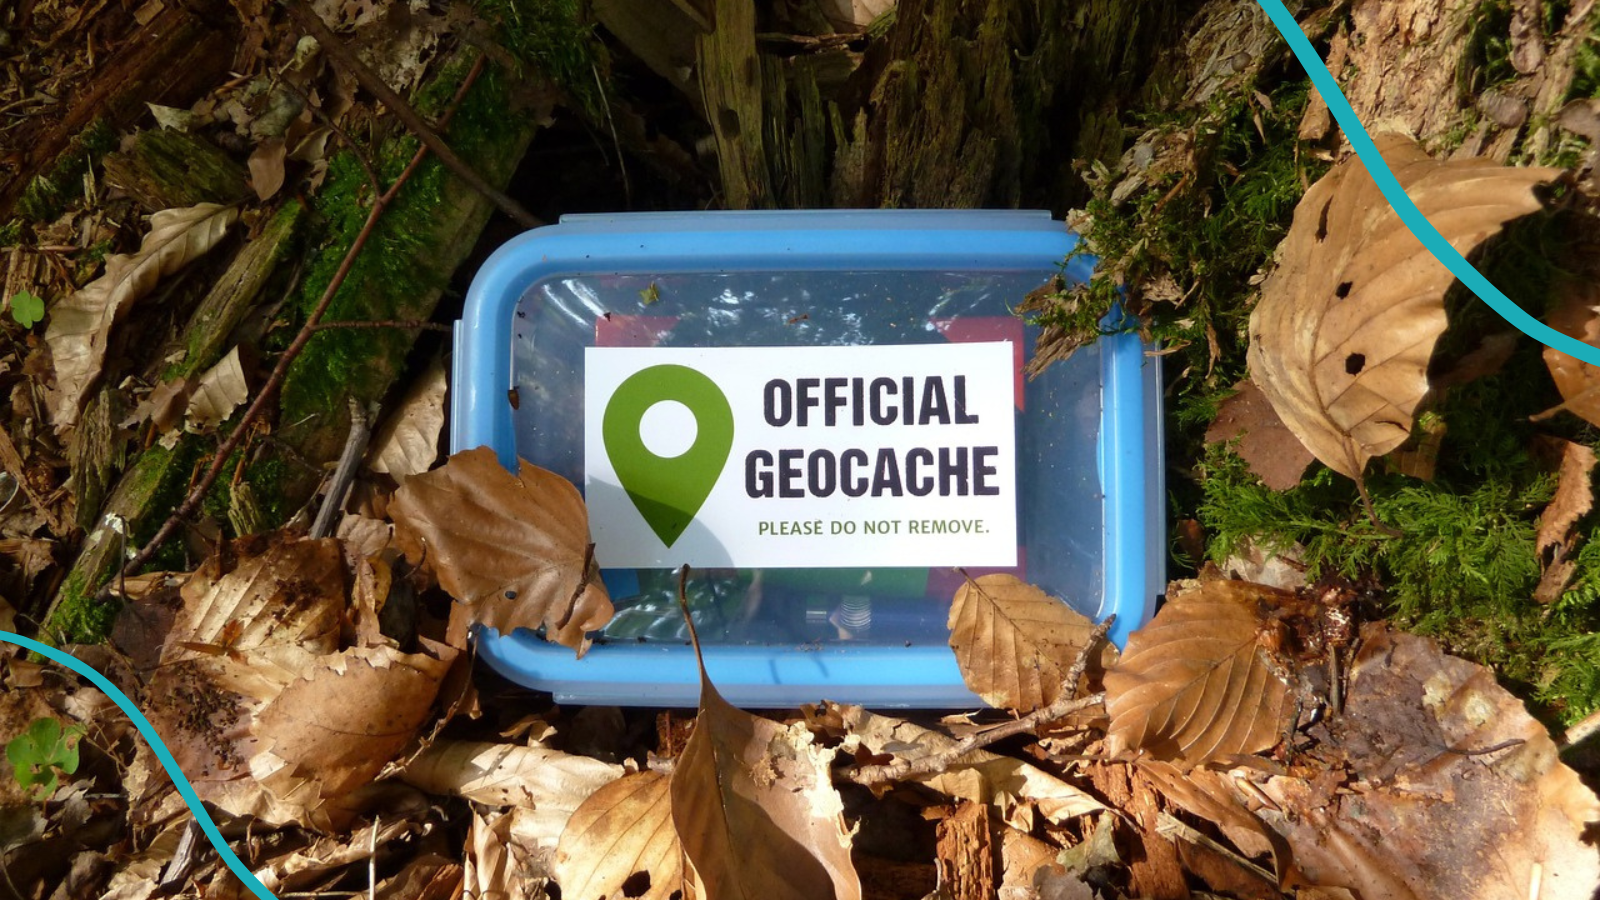 A transparent plastic container labelled "Official Geocache" sitting in a pile of dead leaves.